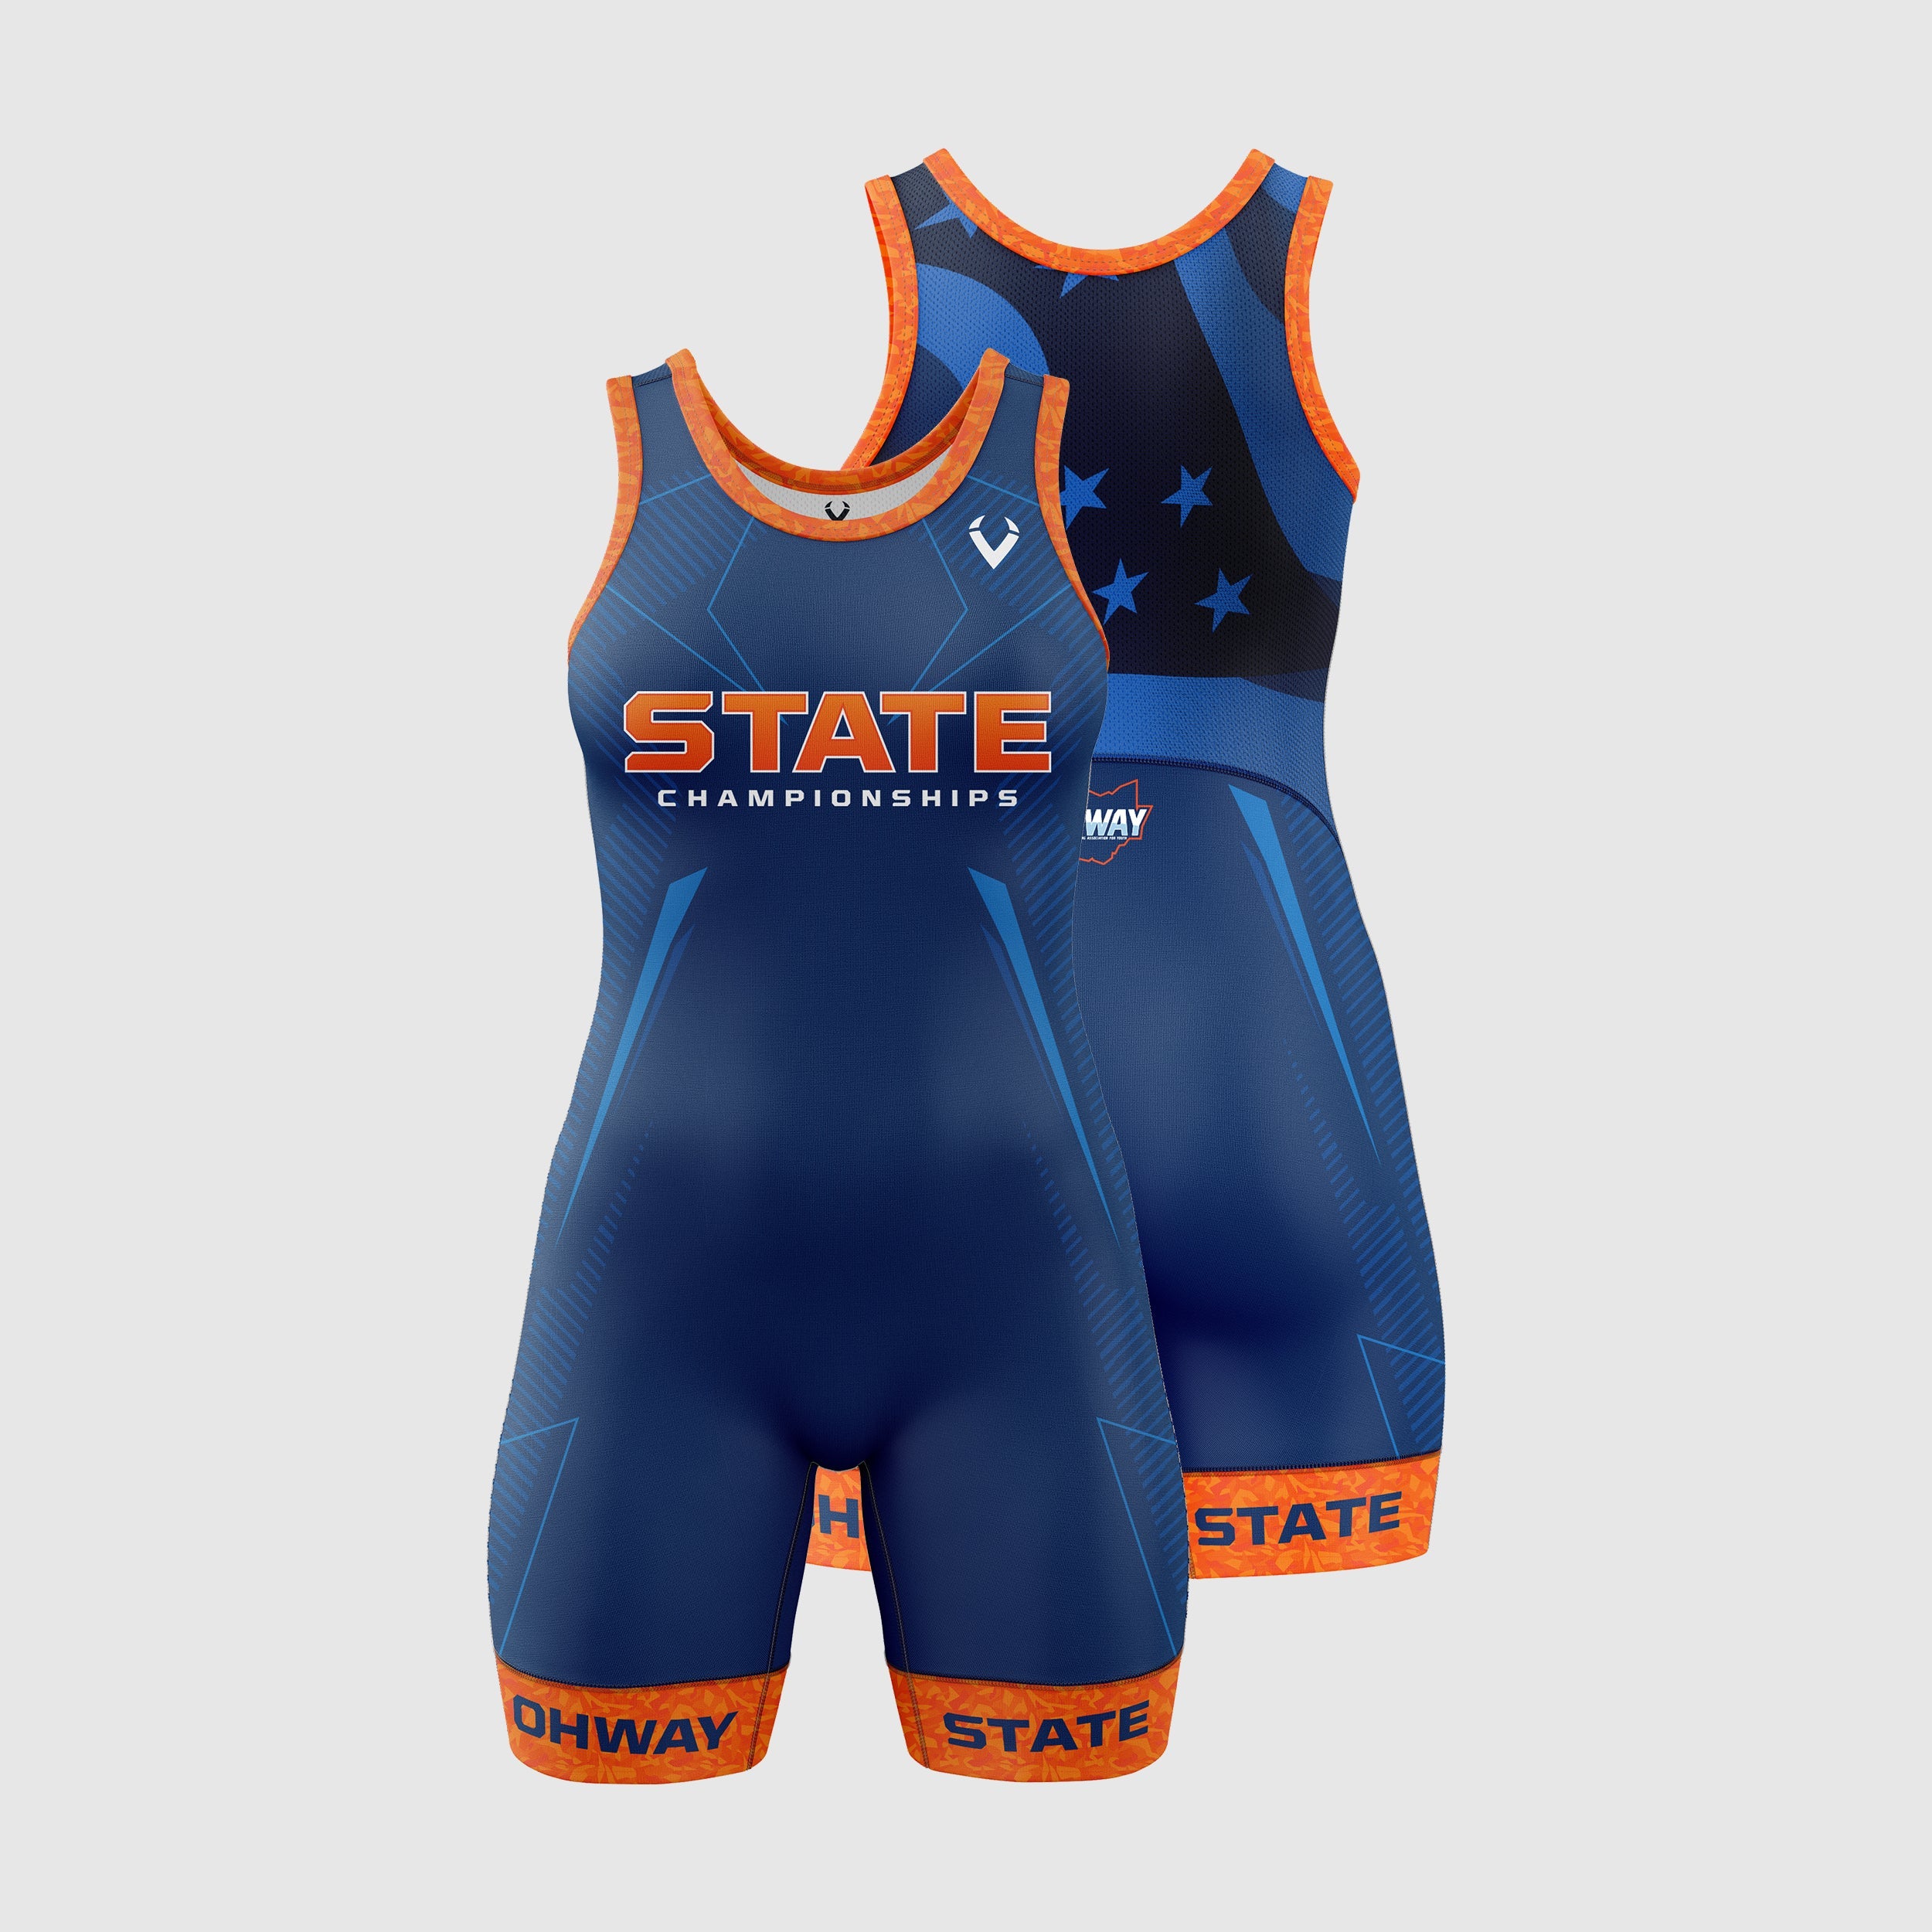 MTO OHWAY State Singlets